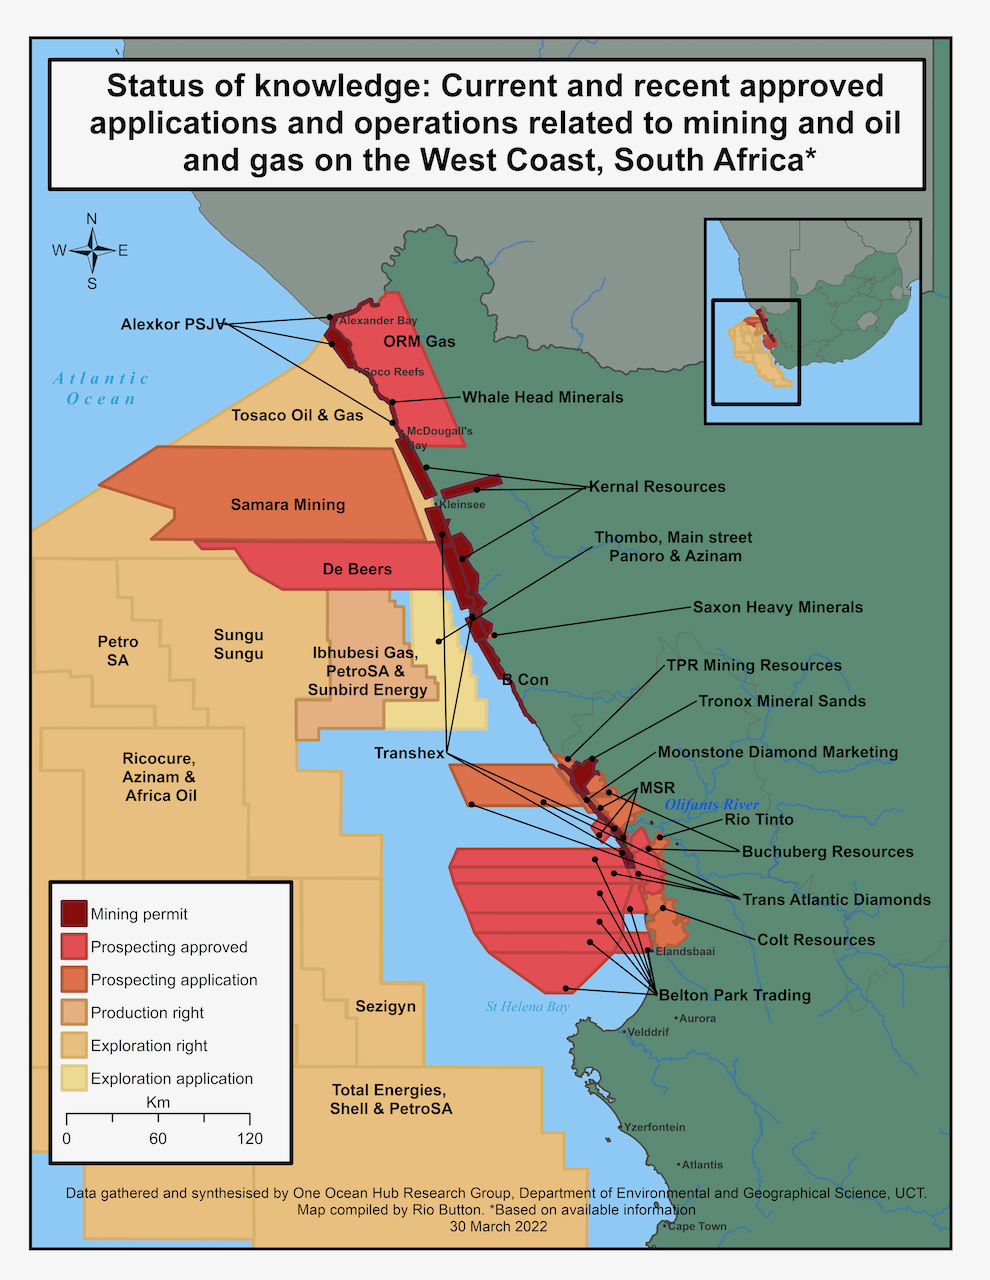 A map showing prospecting and mining applications on the West Coast.